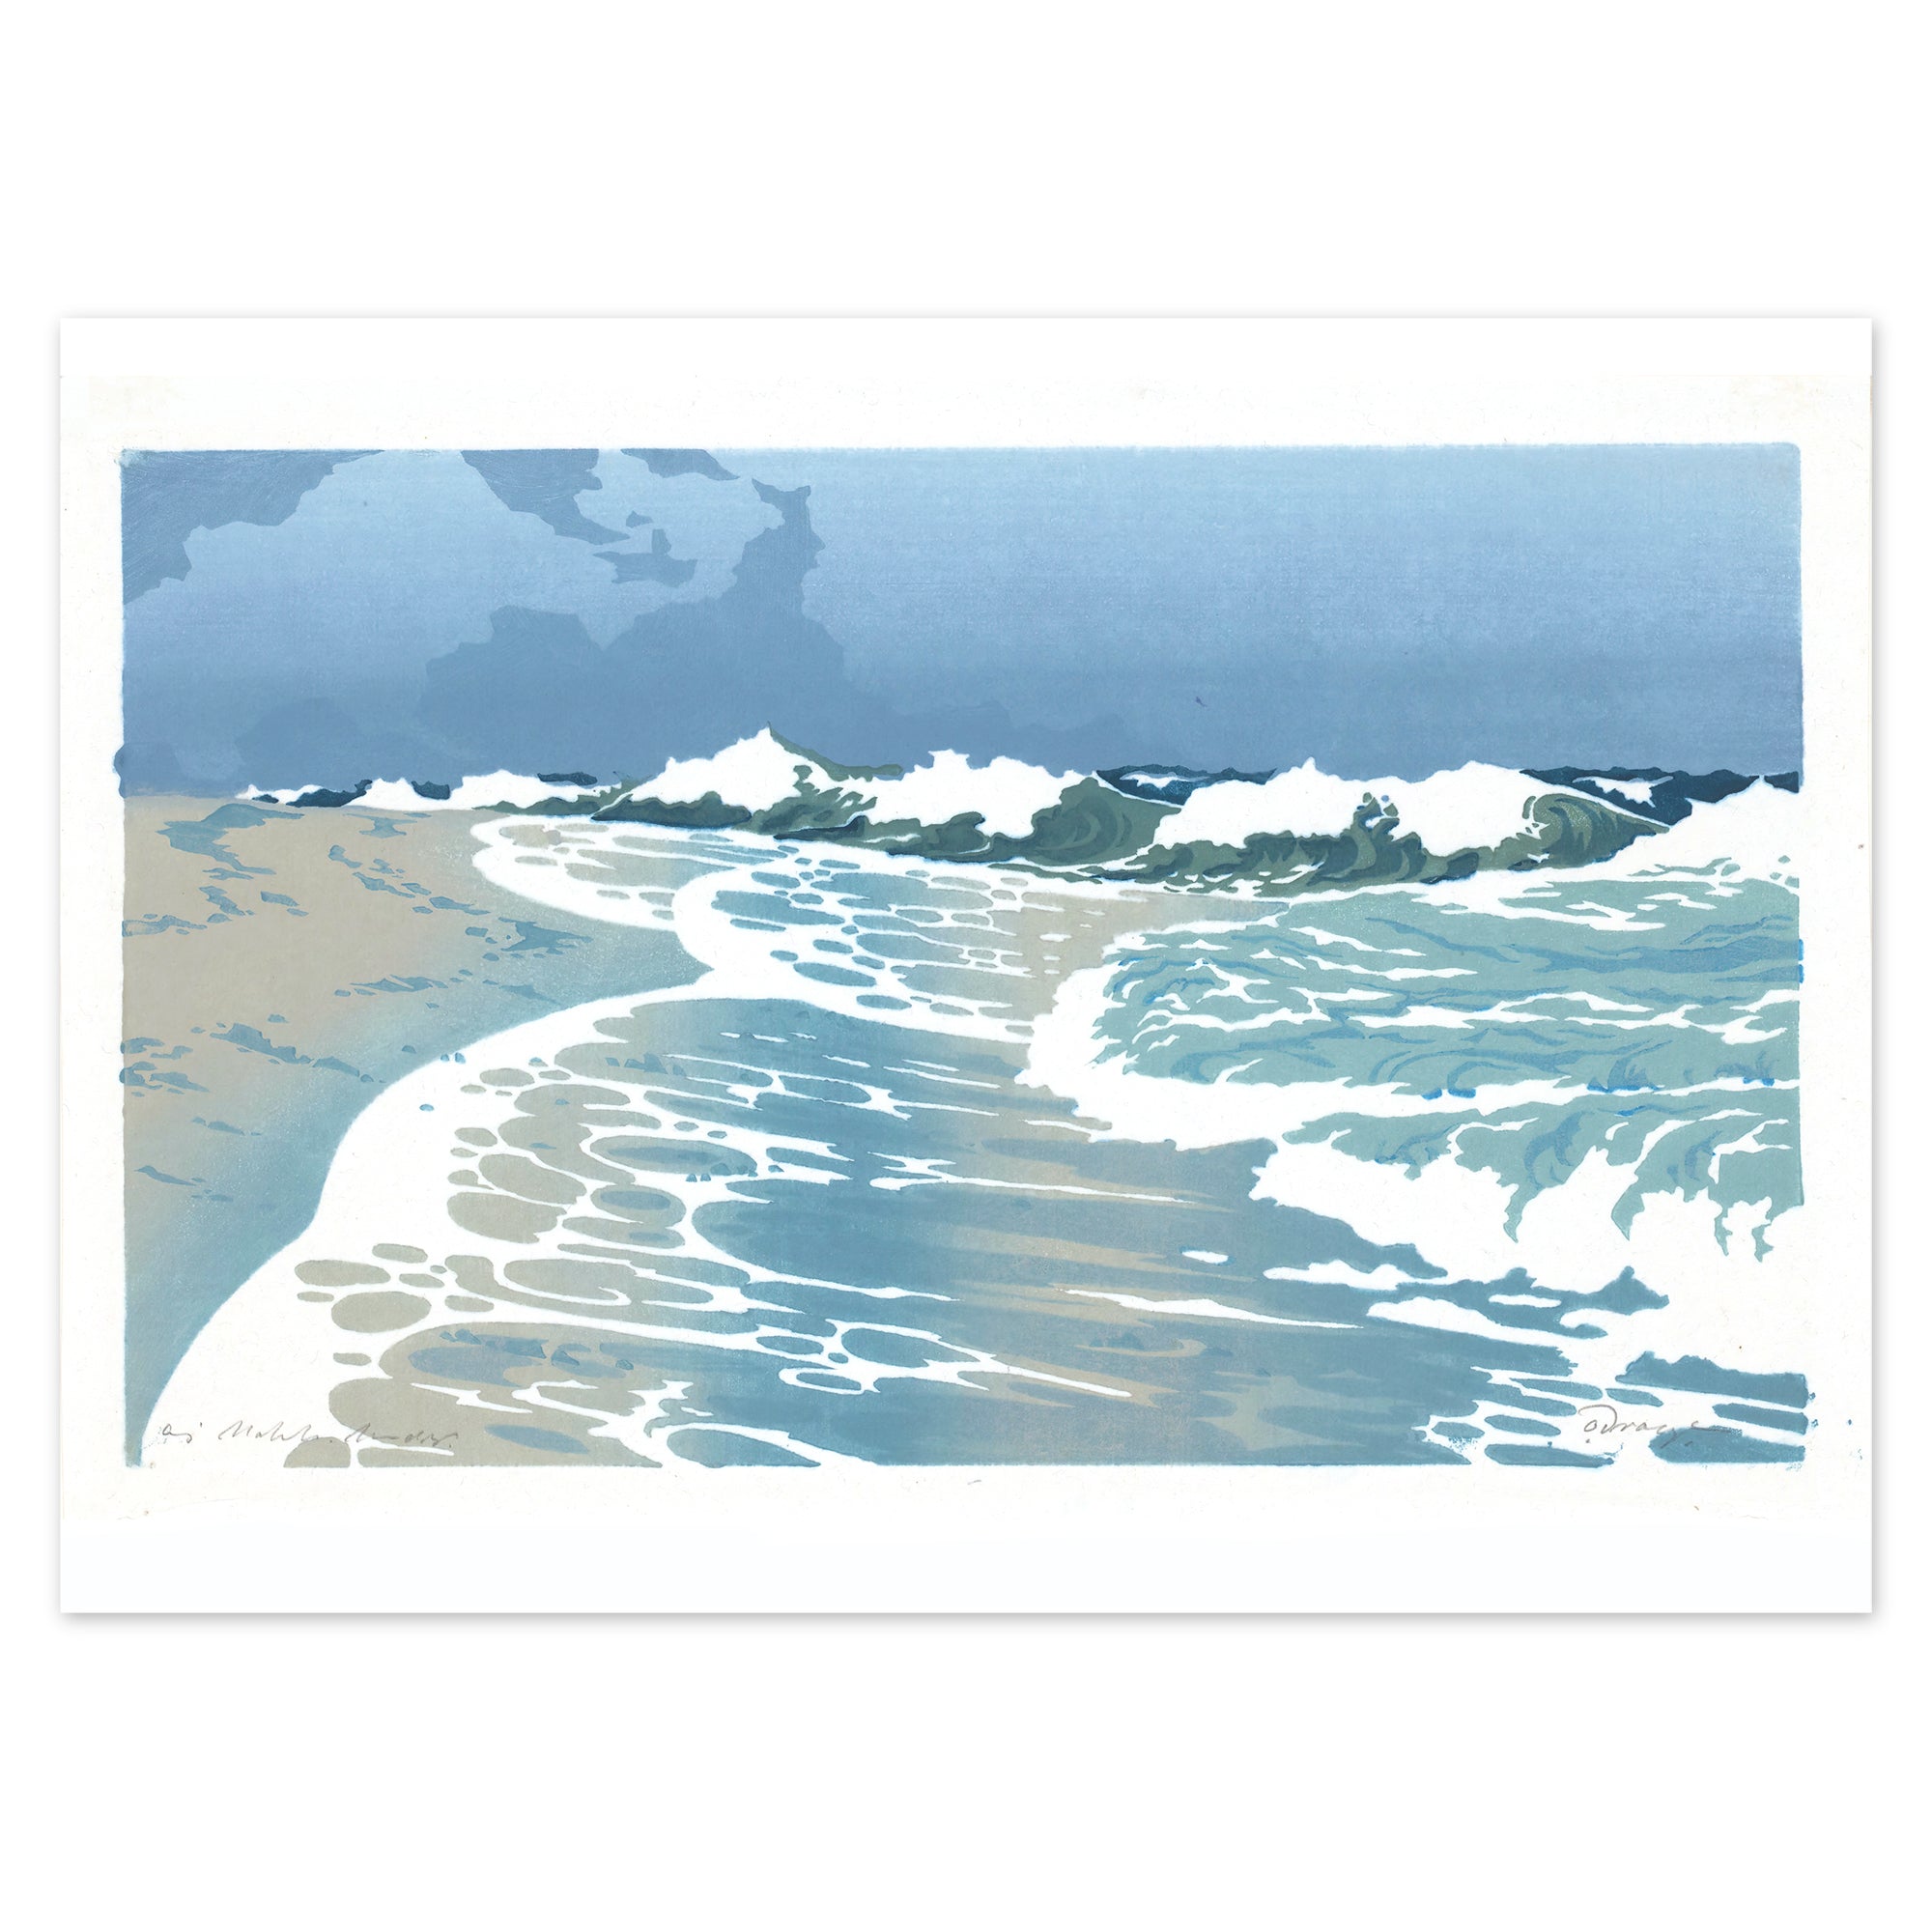 Poster. Ocean waves woodcut by O. Droegle